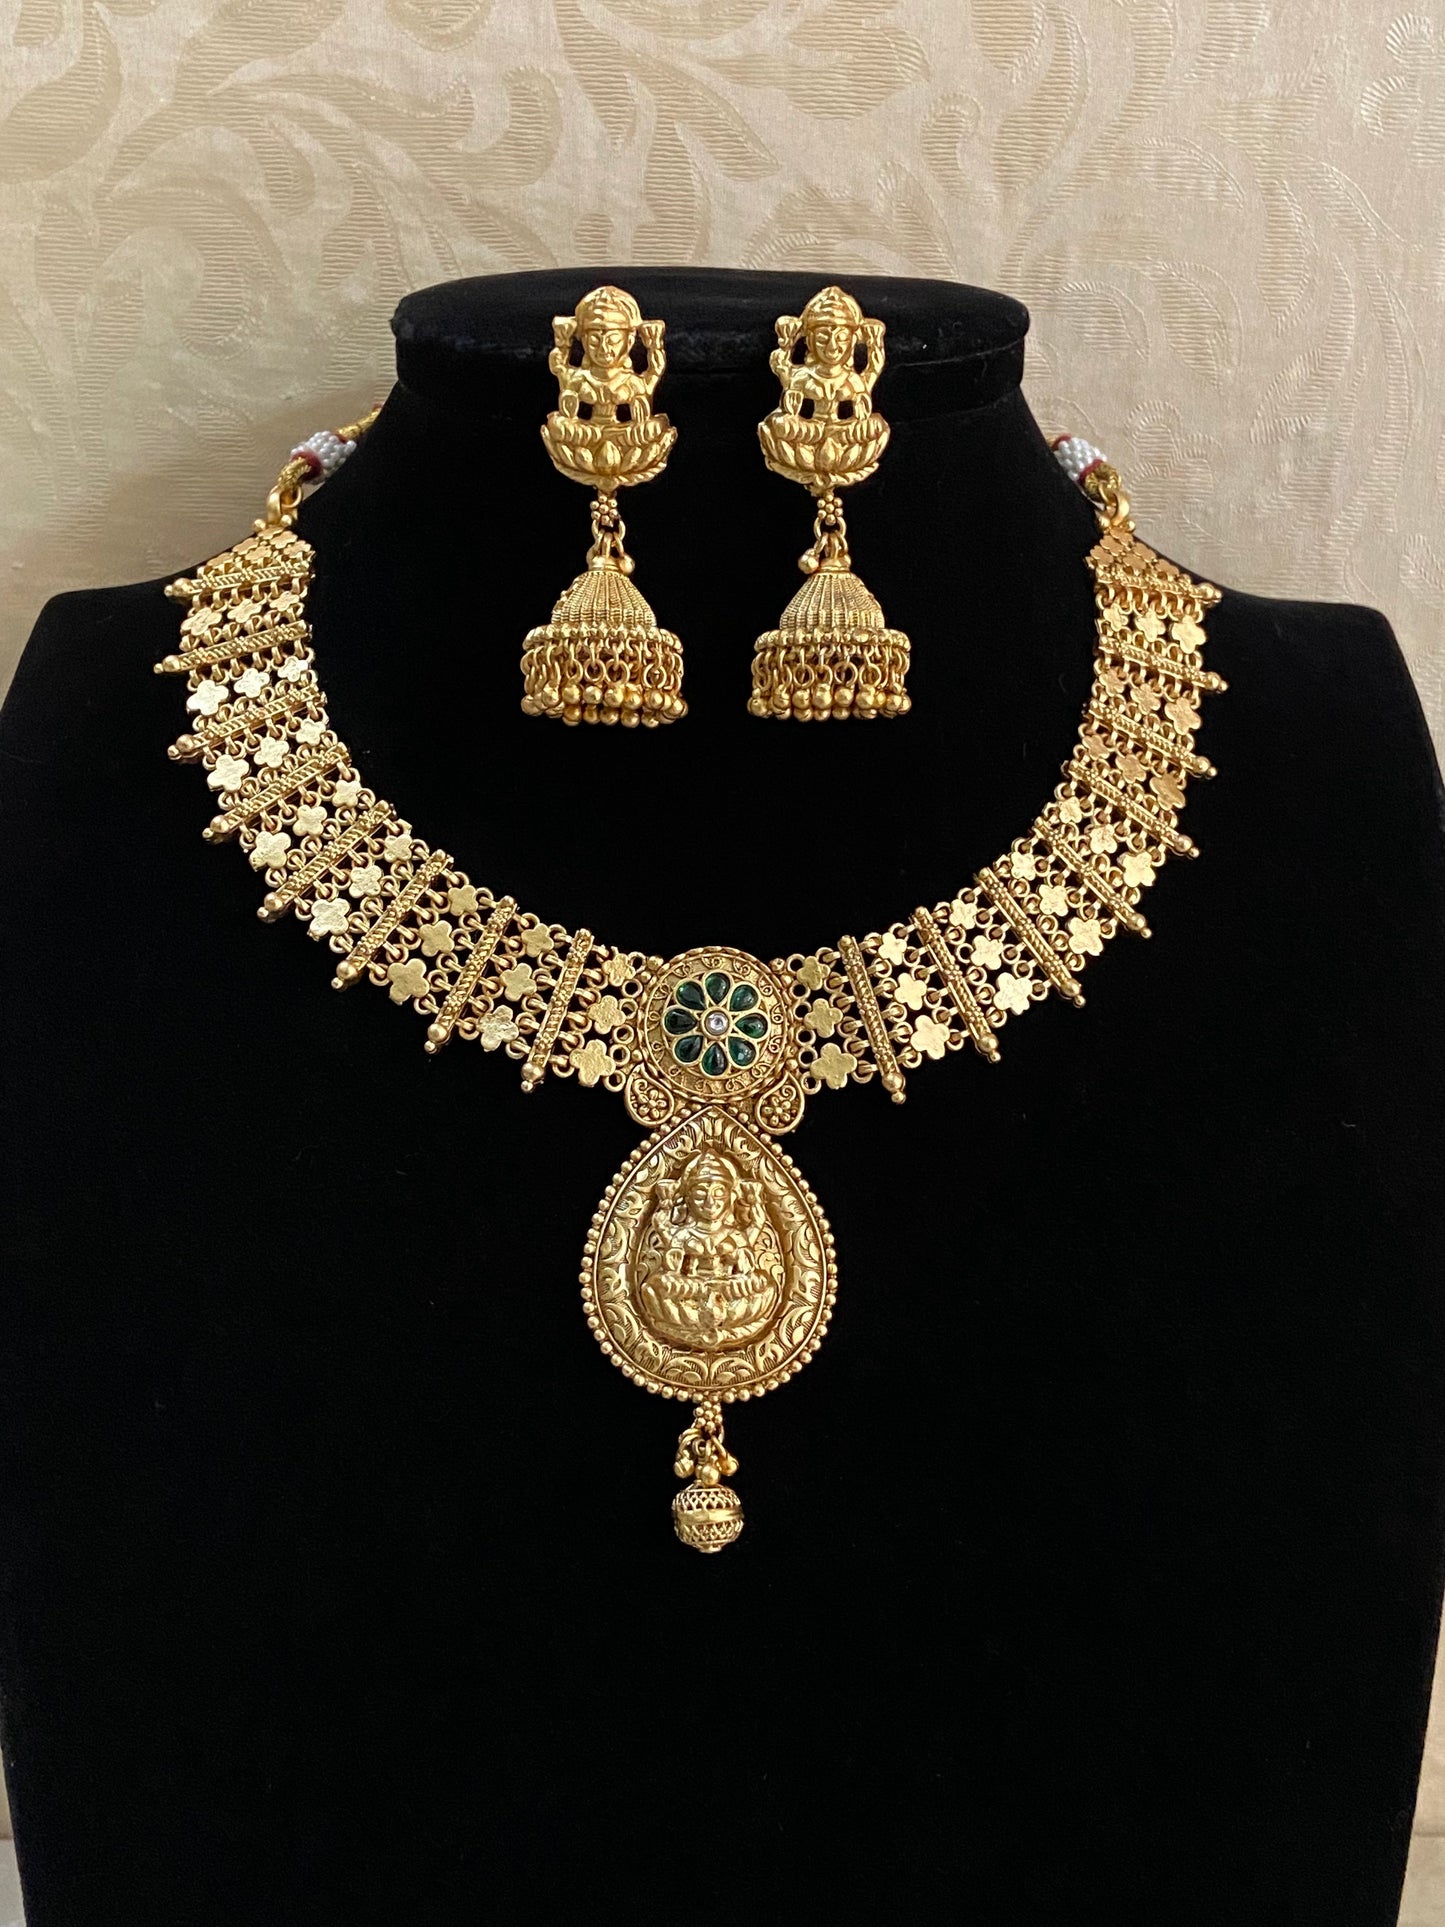 Antique necklace | Indian jewelry